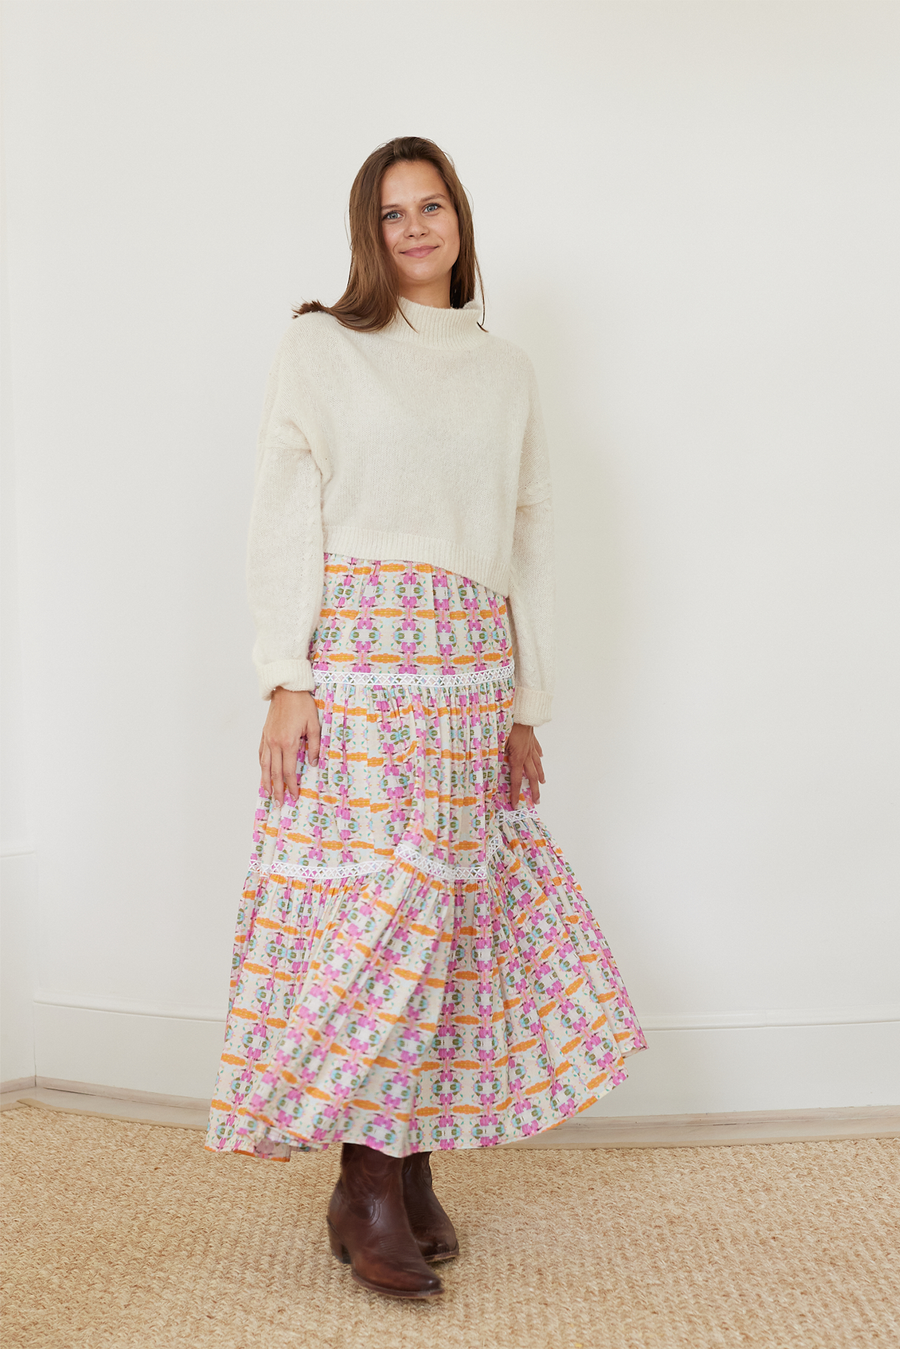 Triple Tiered Maxi Skirt in Begonia by Brooks Avenue